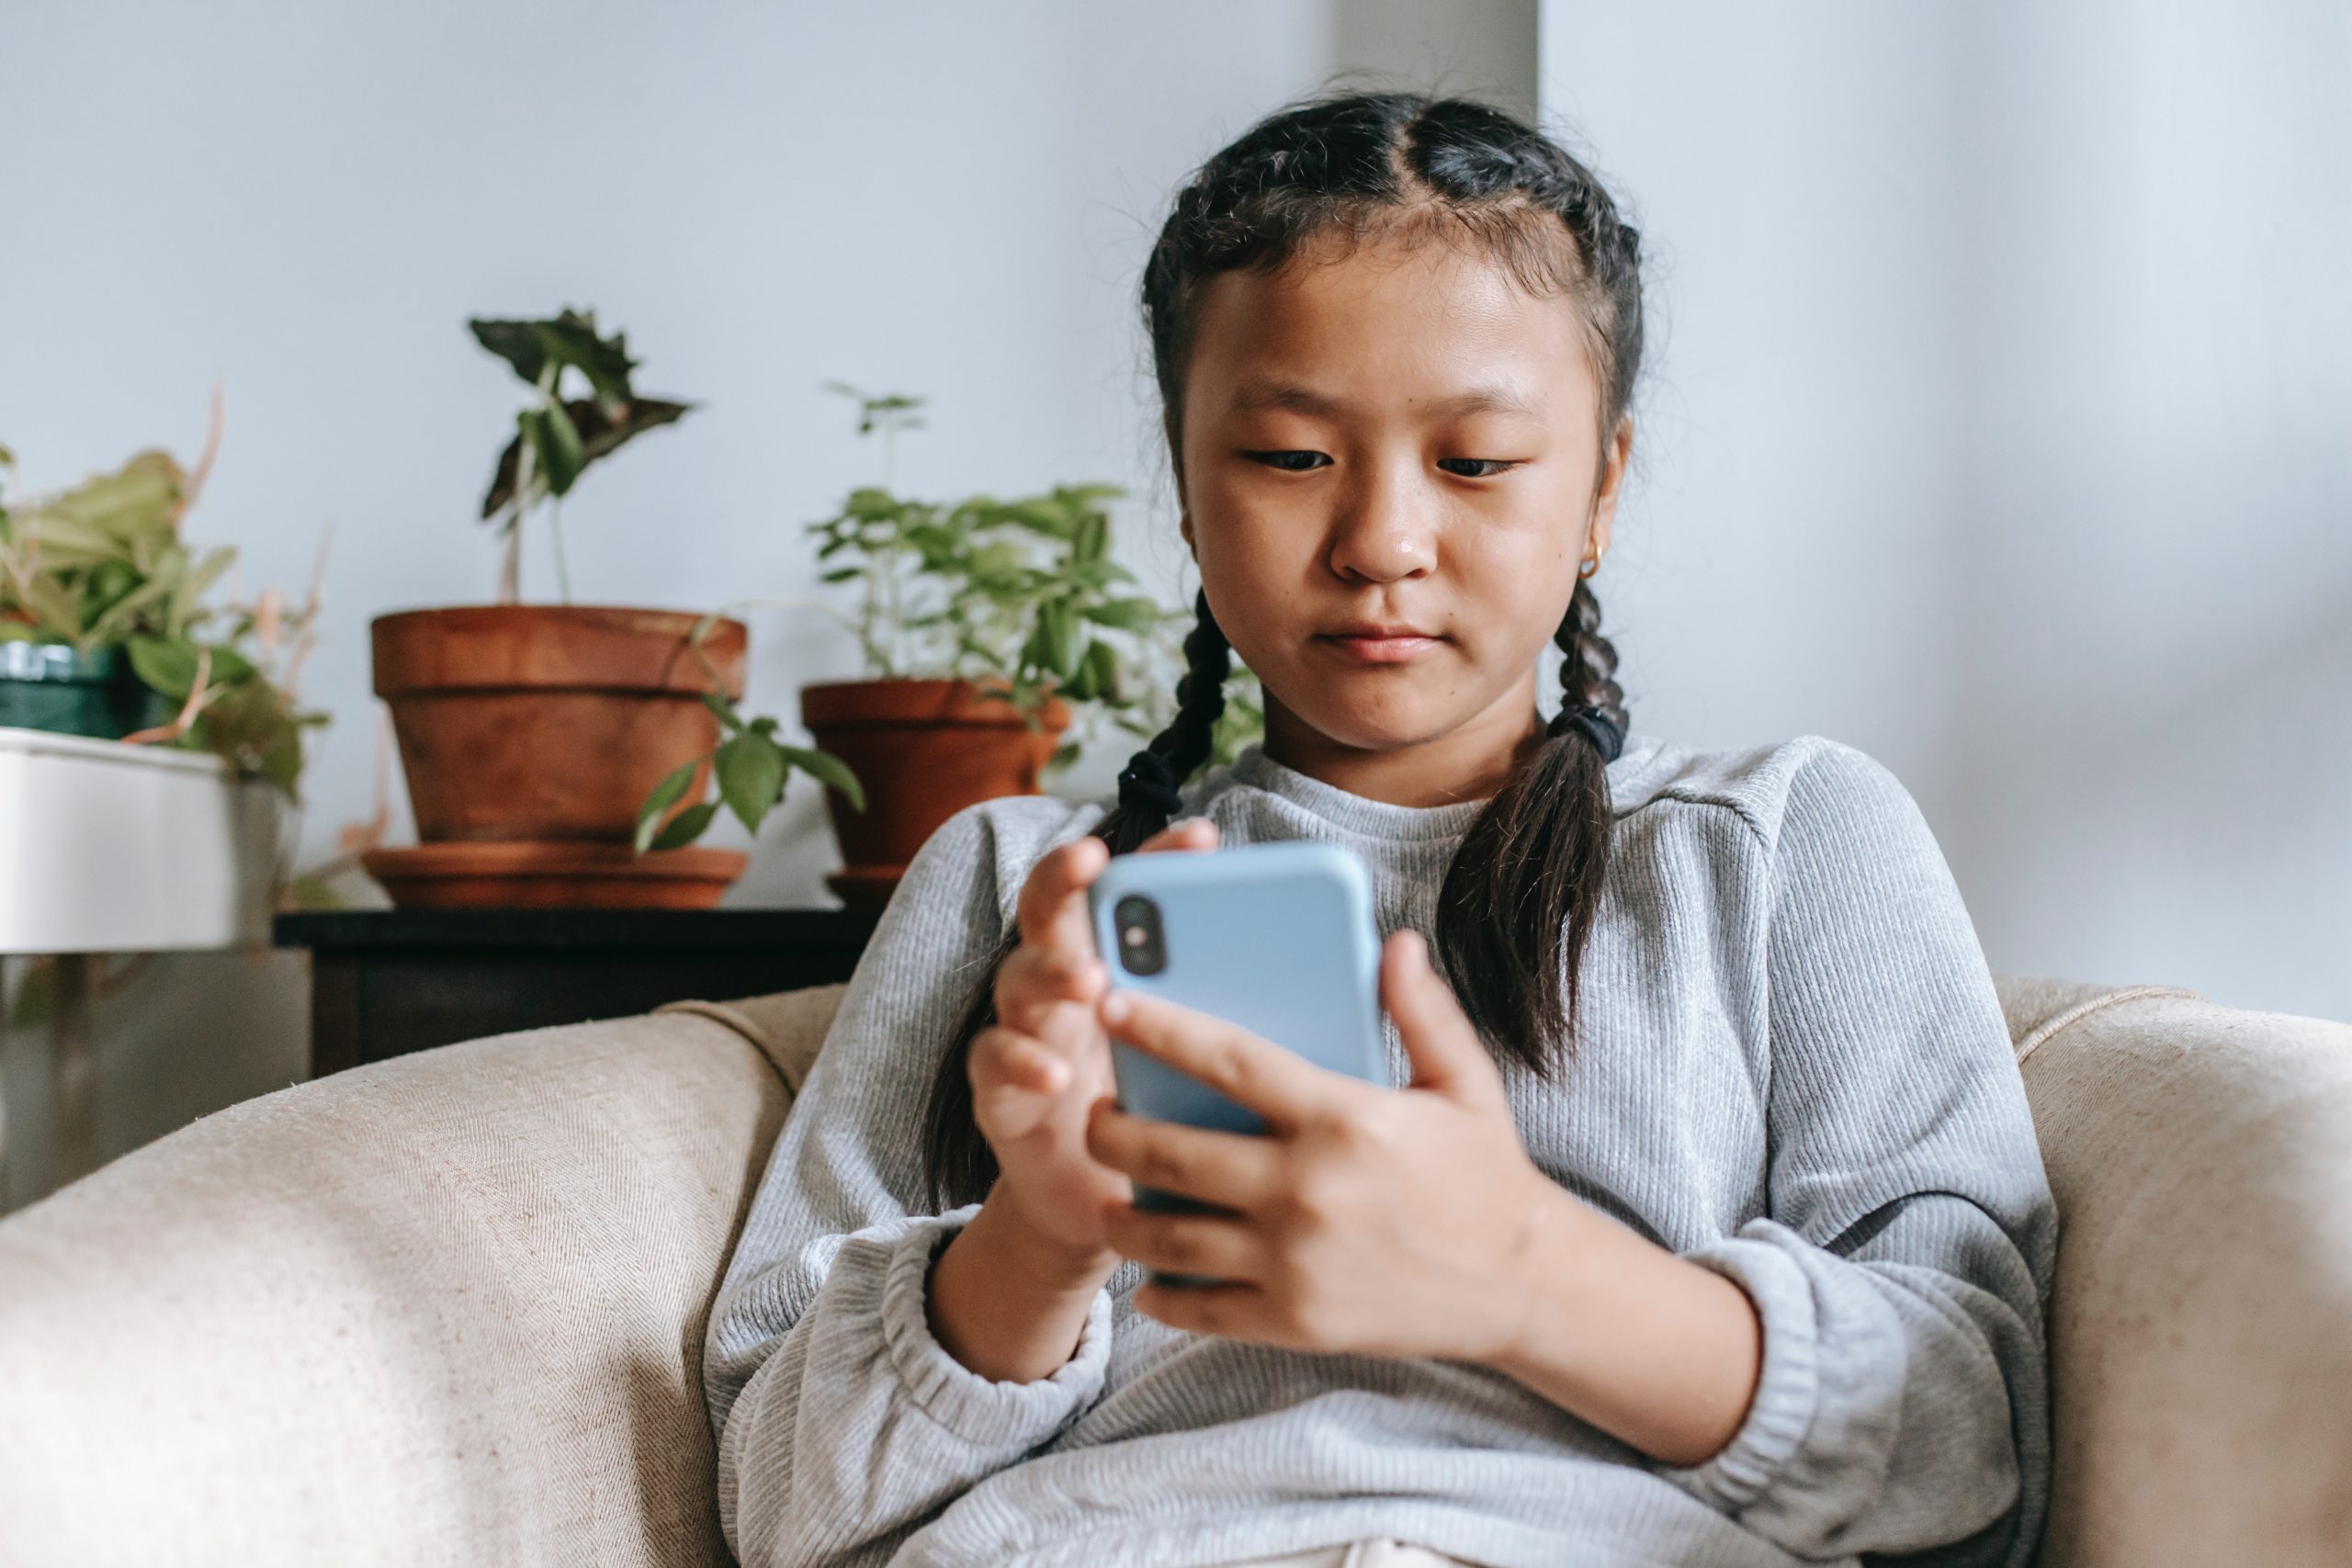 How to Help Your Child Make Responsible Choices with Digital Devices